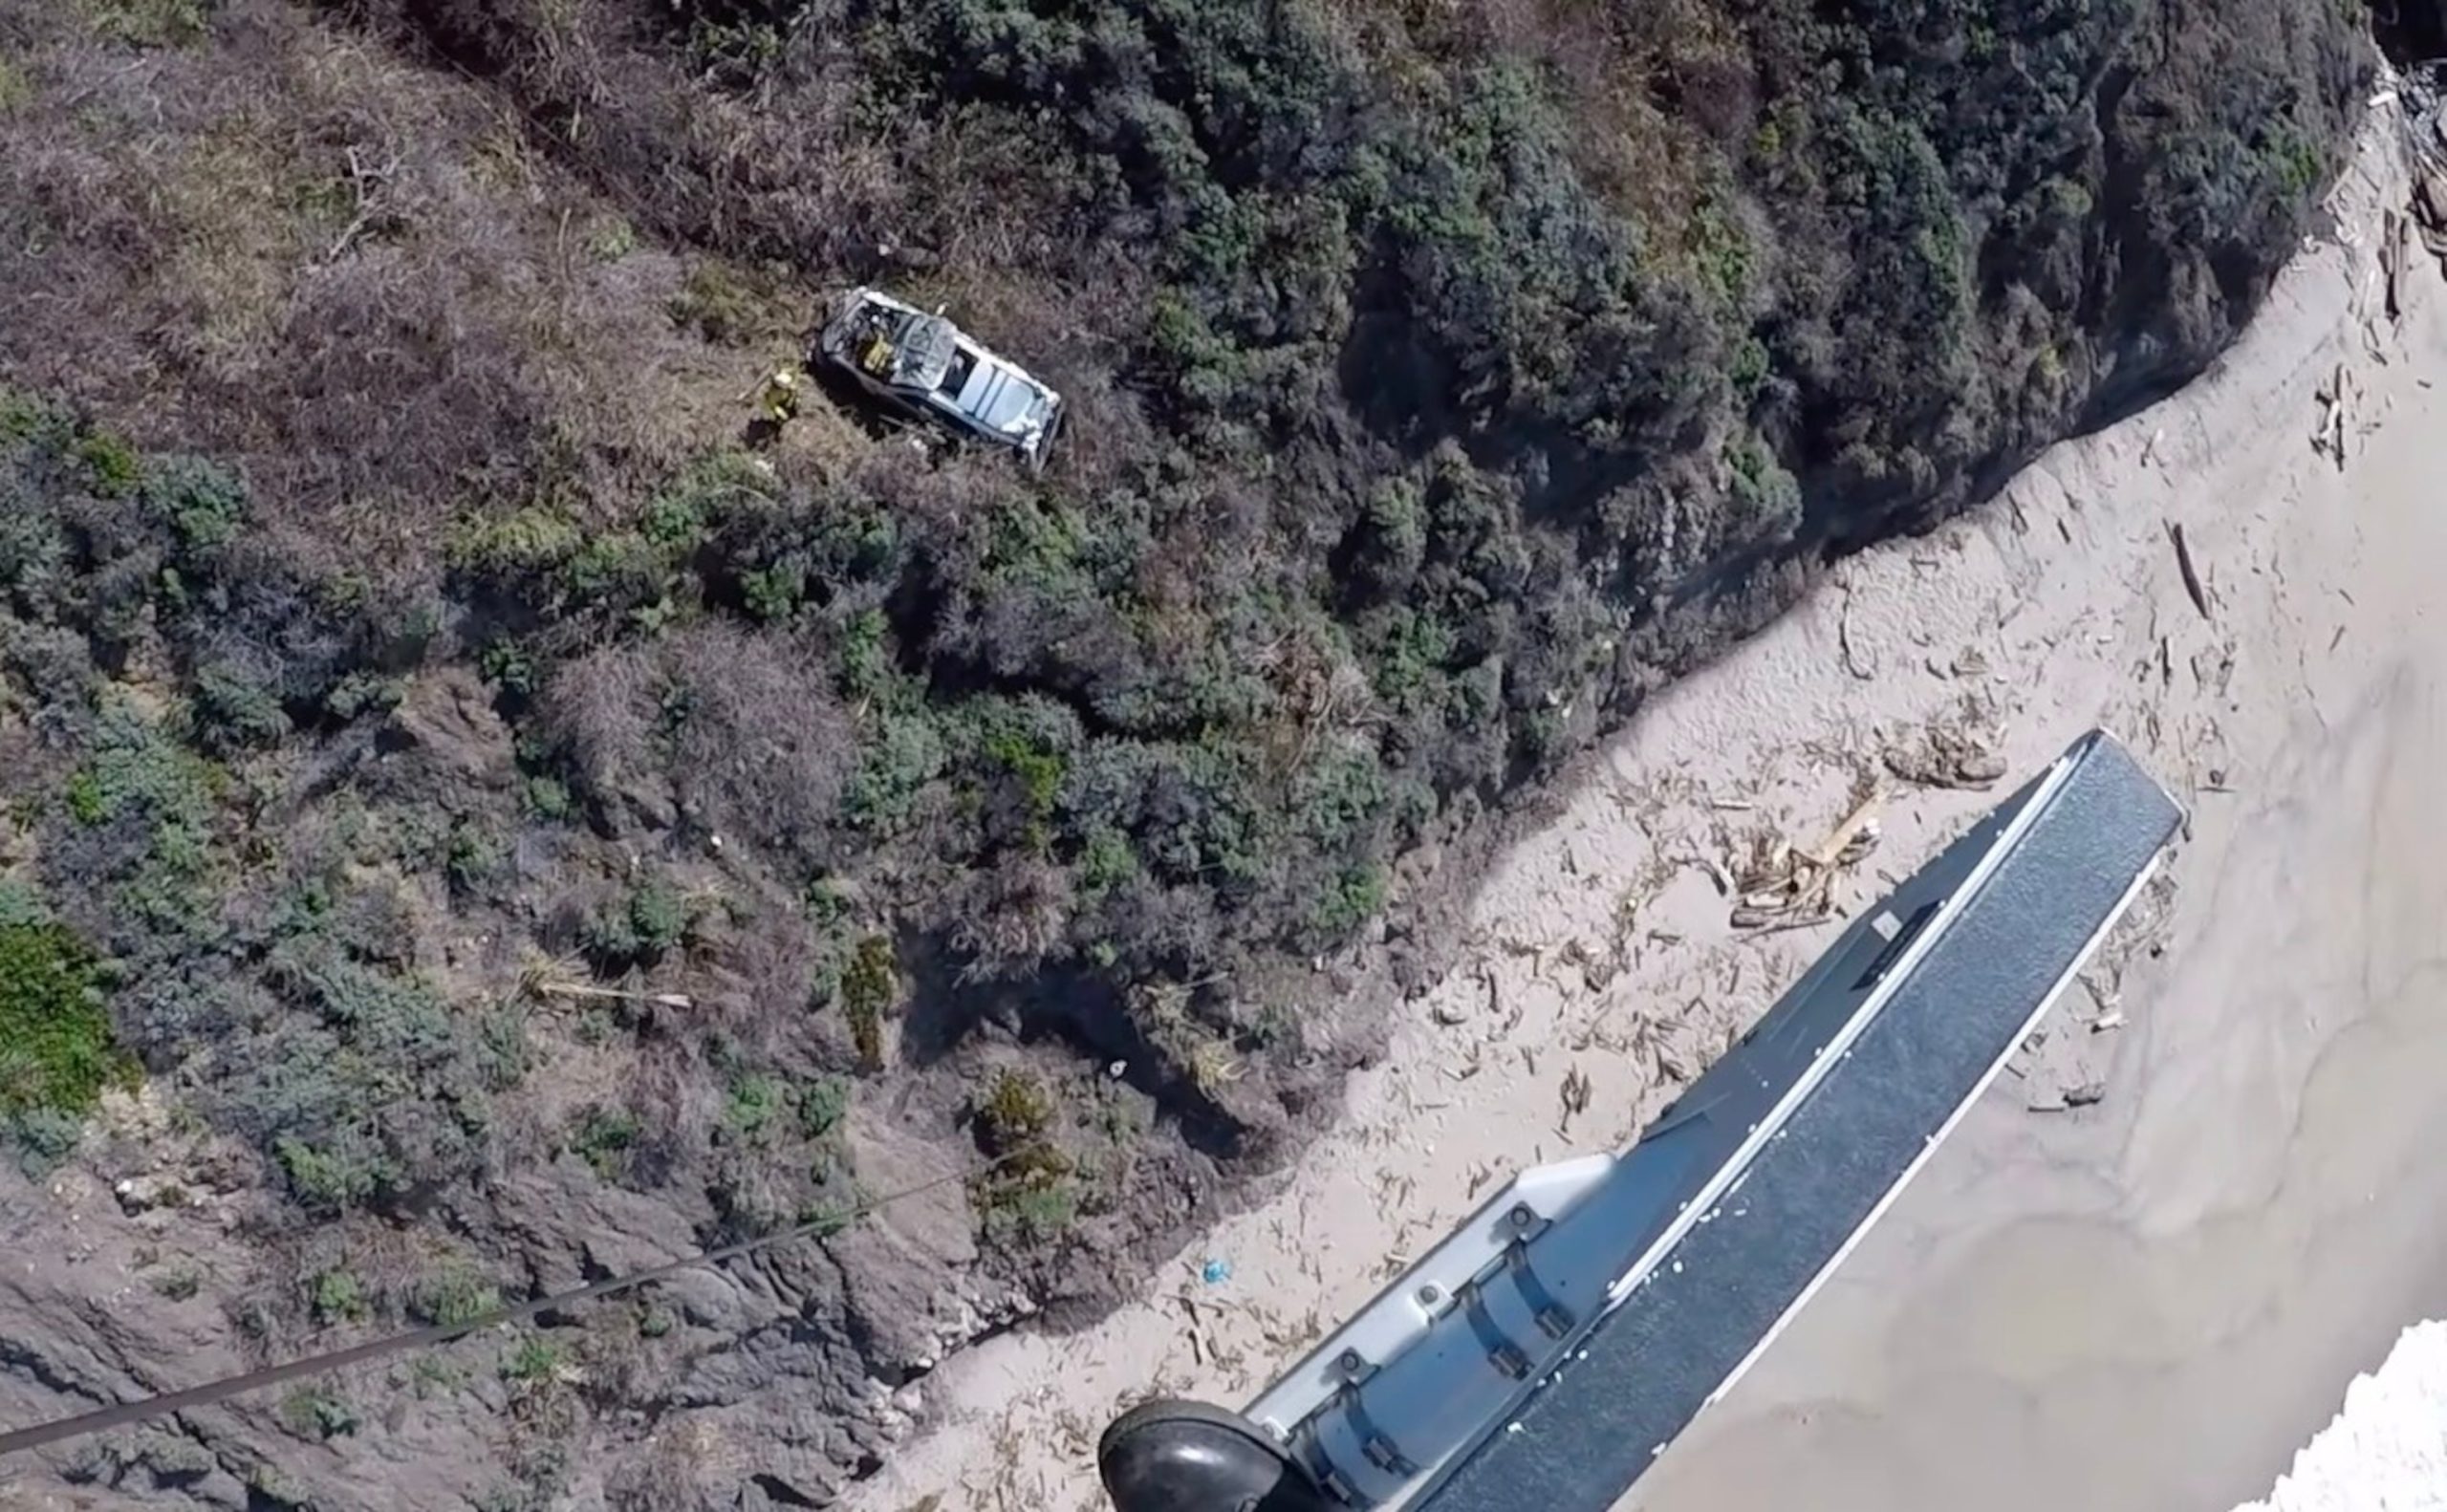 Man rescued after being stranded for 2 days when his car rolled down a cliffside in Big Sur